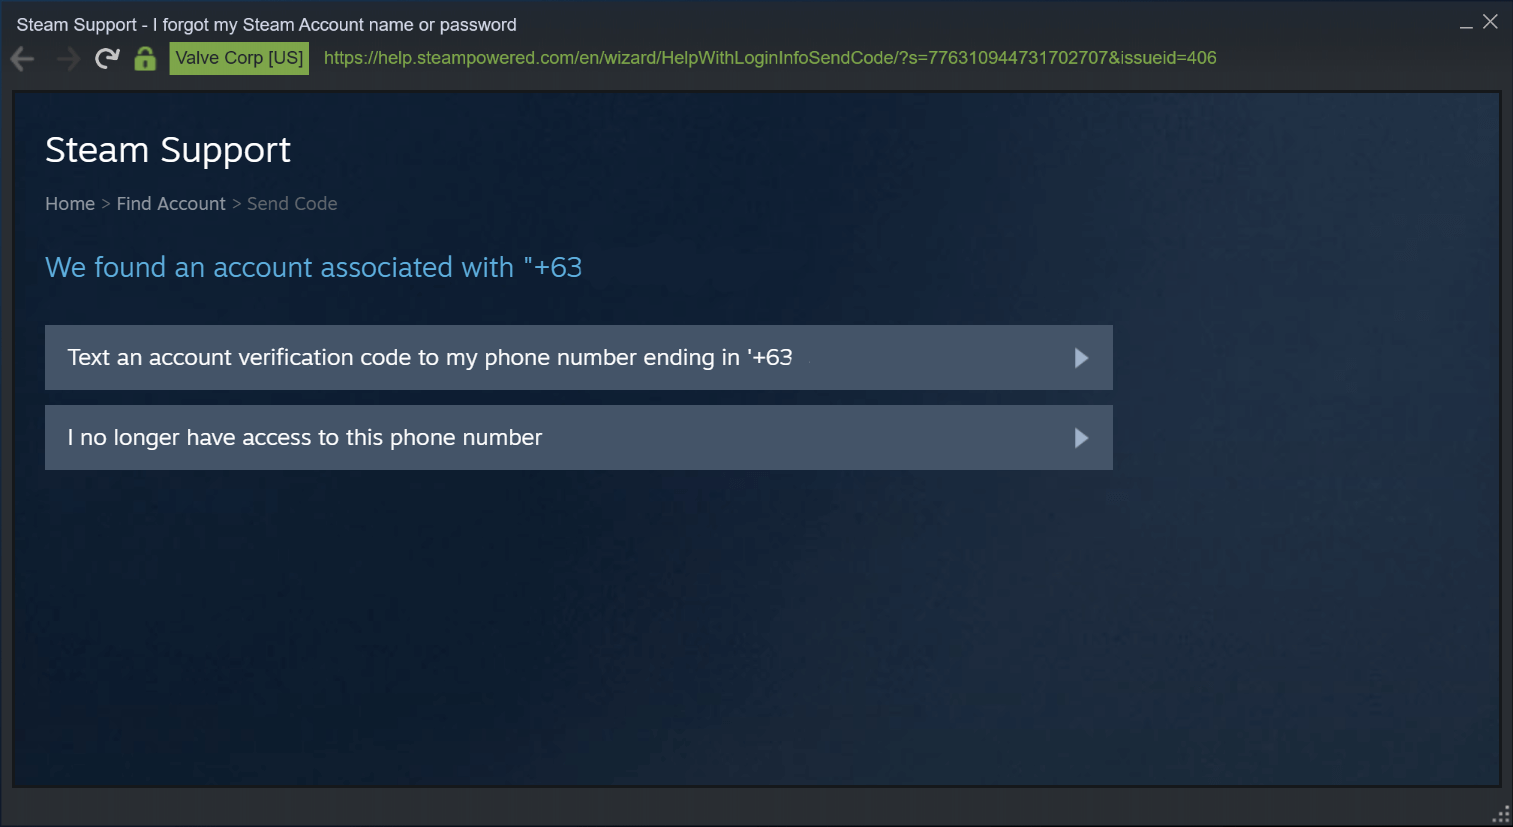 steam forgot password and username